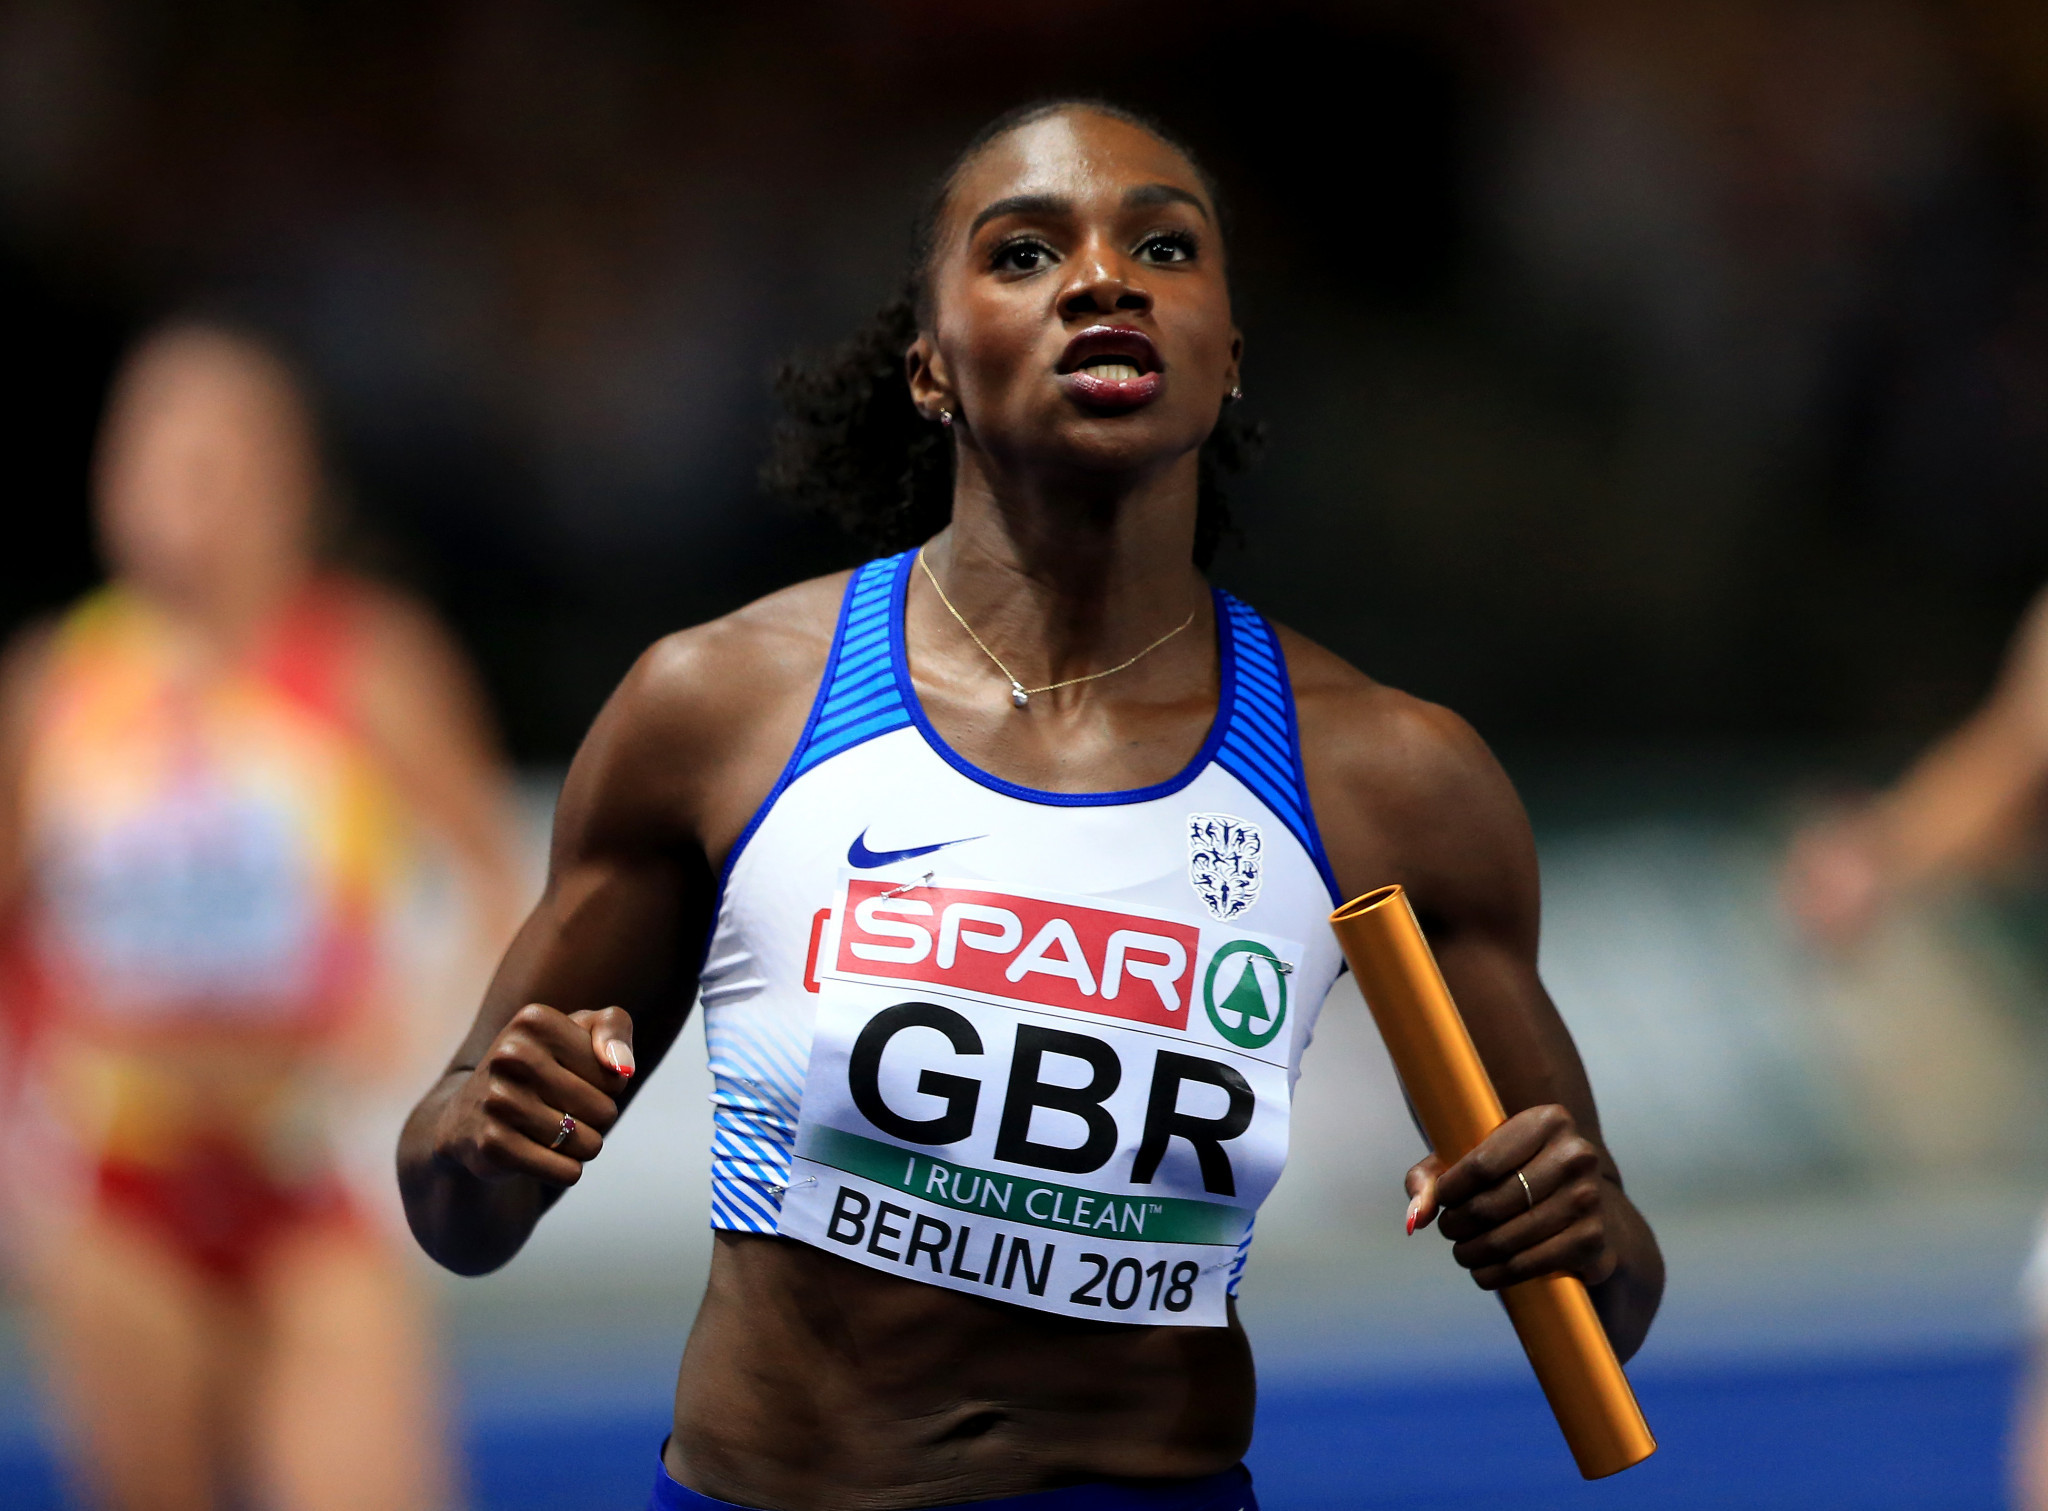  Asher-Smith faces Miller-Uibo in stacked 200m at Birmingham IAAF Diamond League meeting 